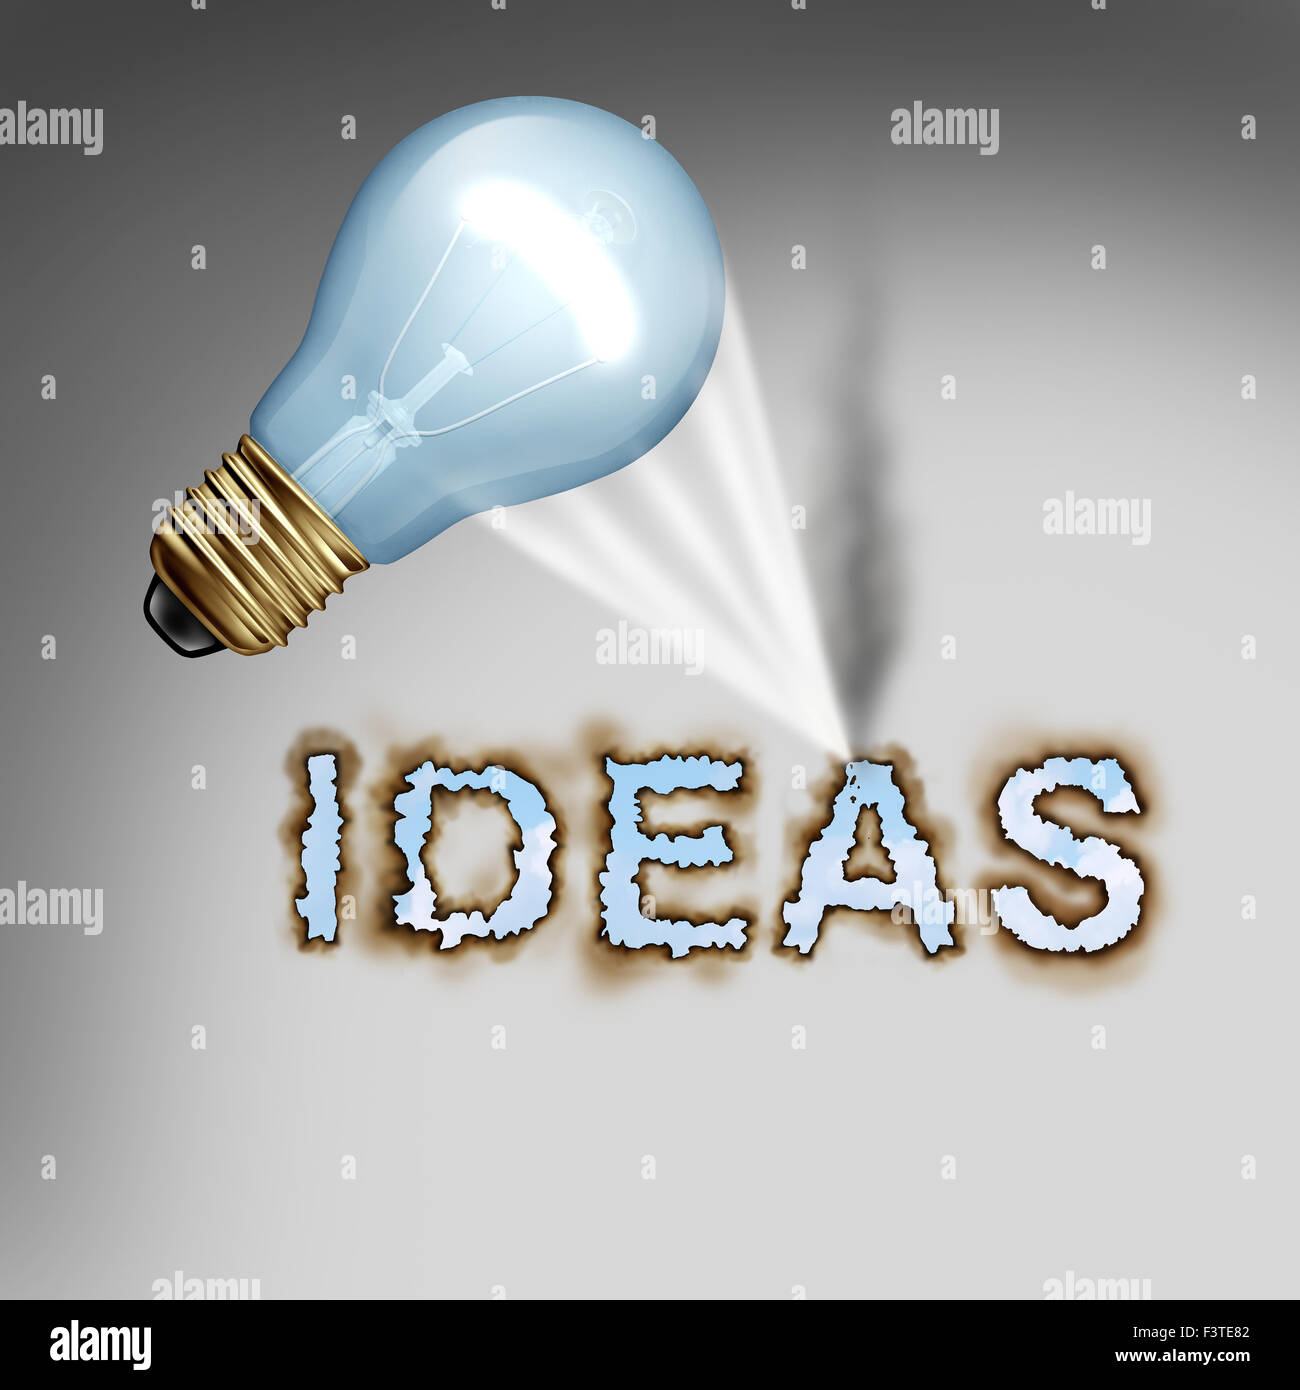 Idea concept creative symbol with a lightbulb reflecting a hot concentrated beam of light on paper burning letters as a design metaphor for the energy of creativity and powerful thinking. Stock Photo